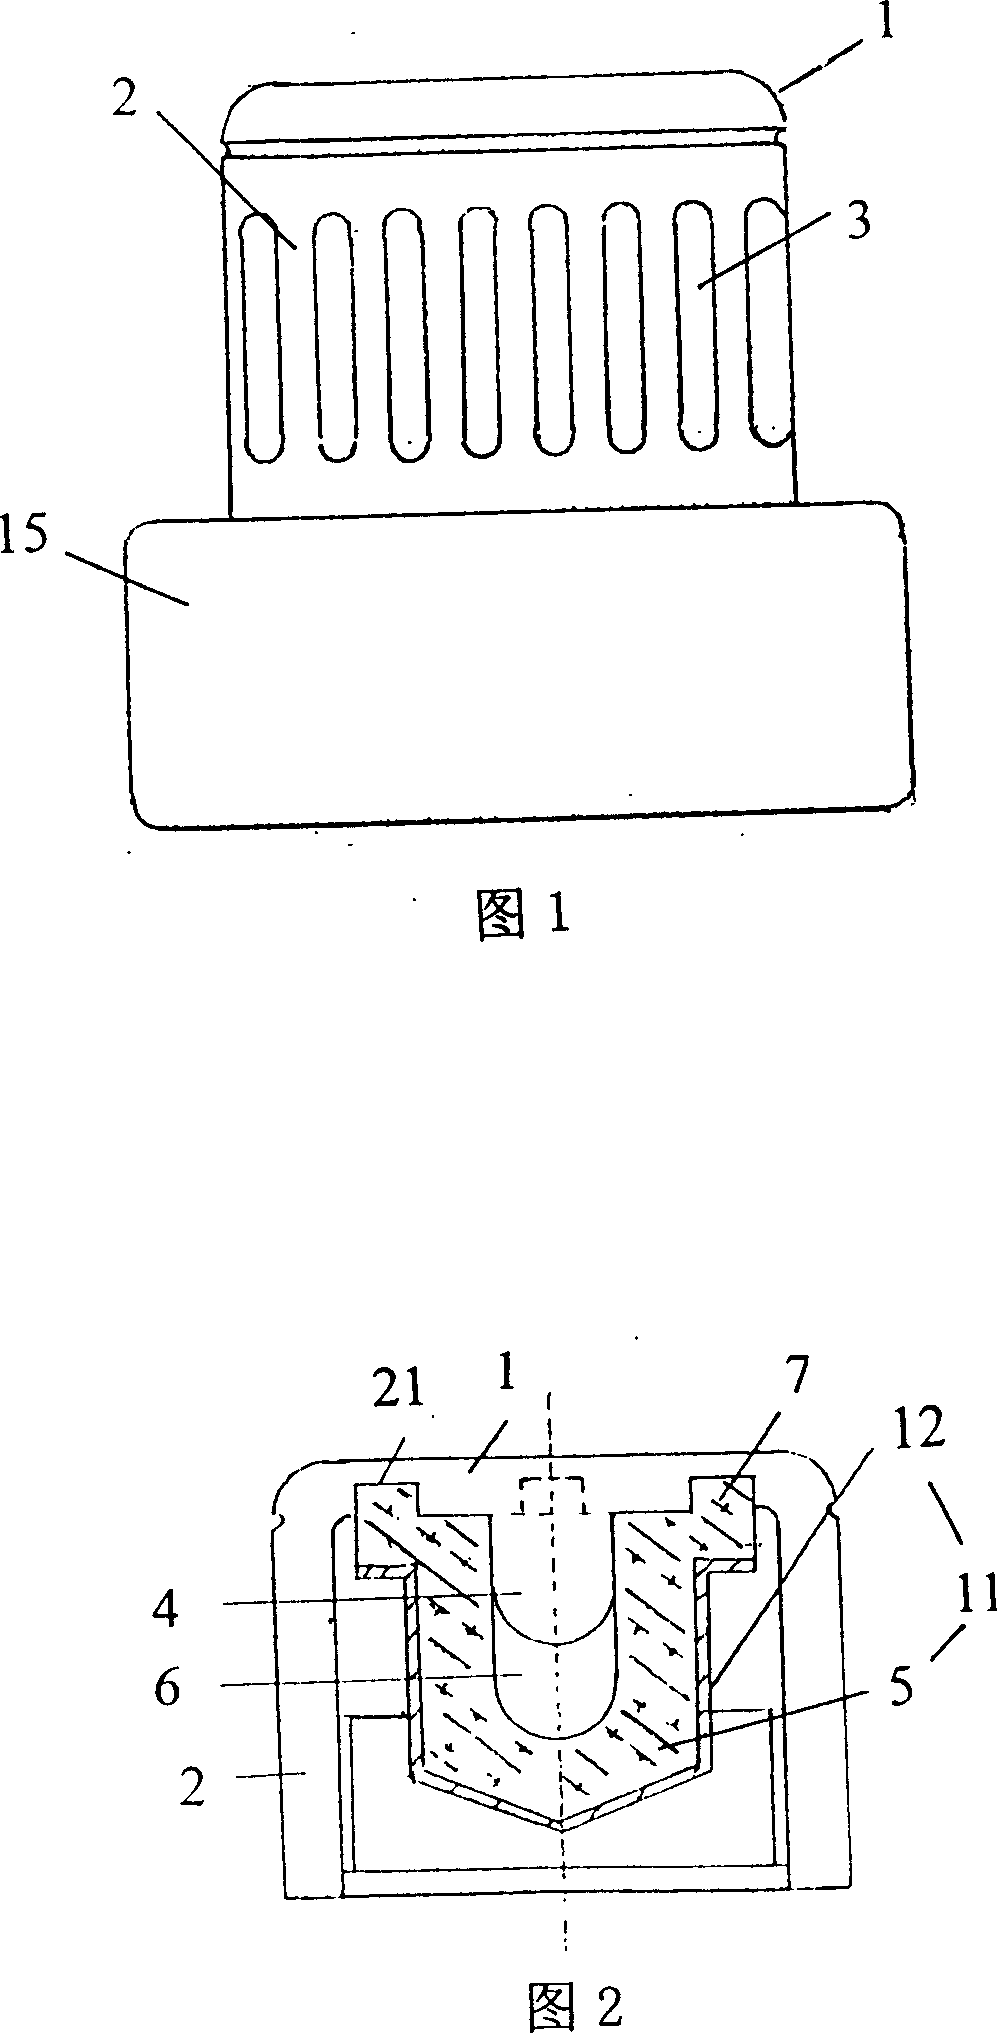 Device for grinding medical tablets